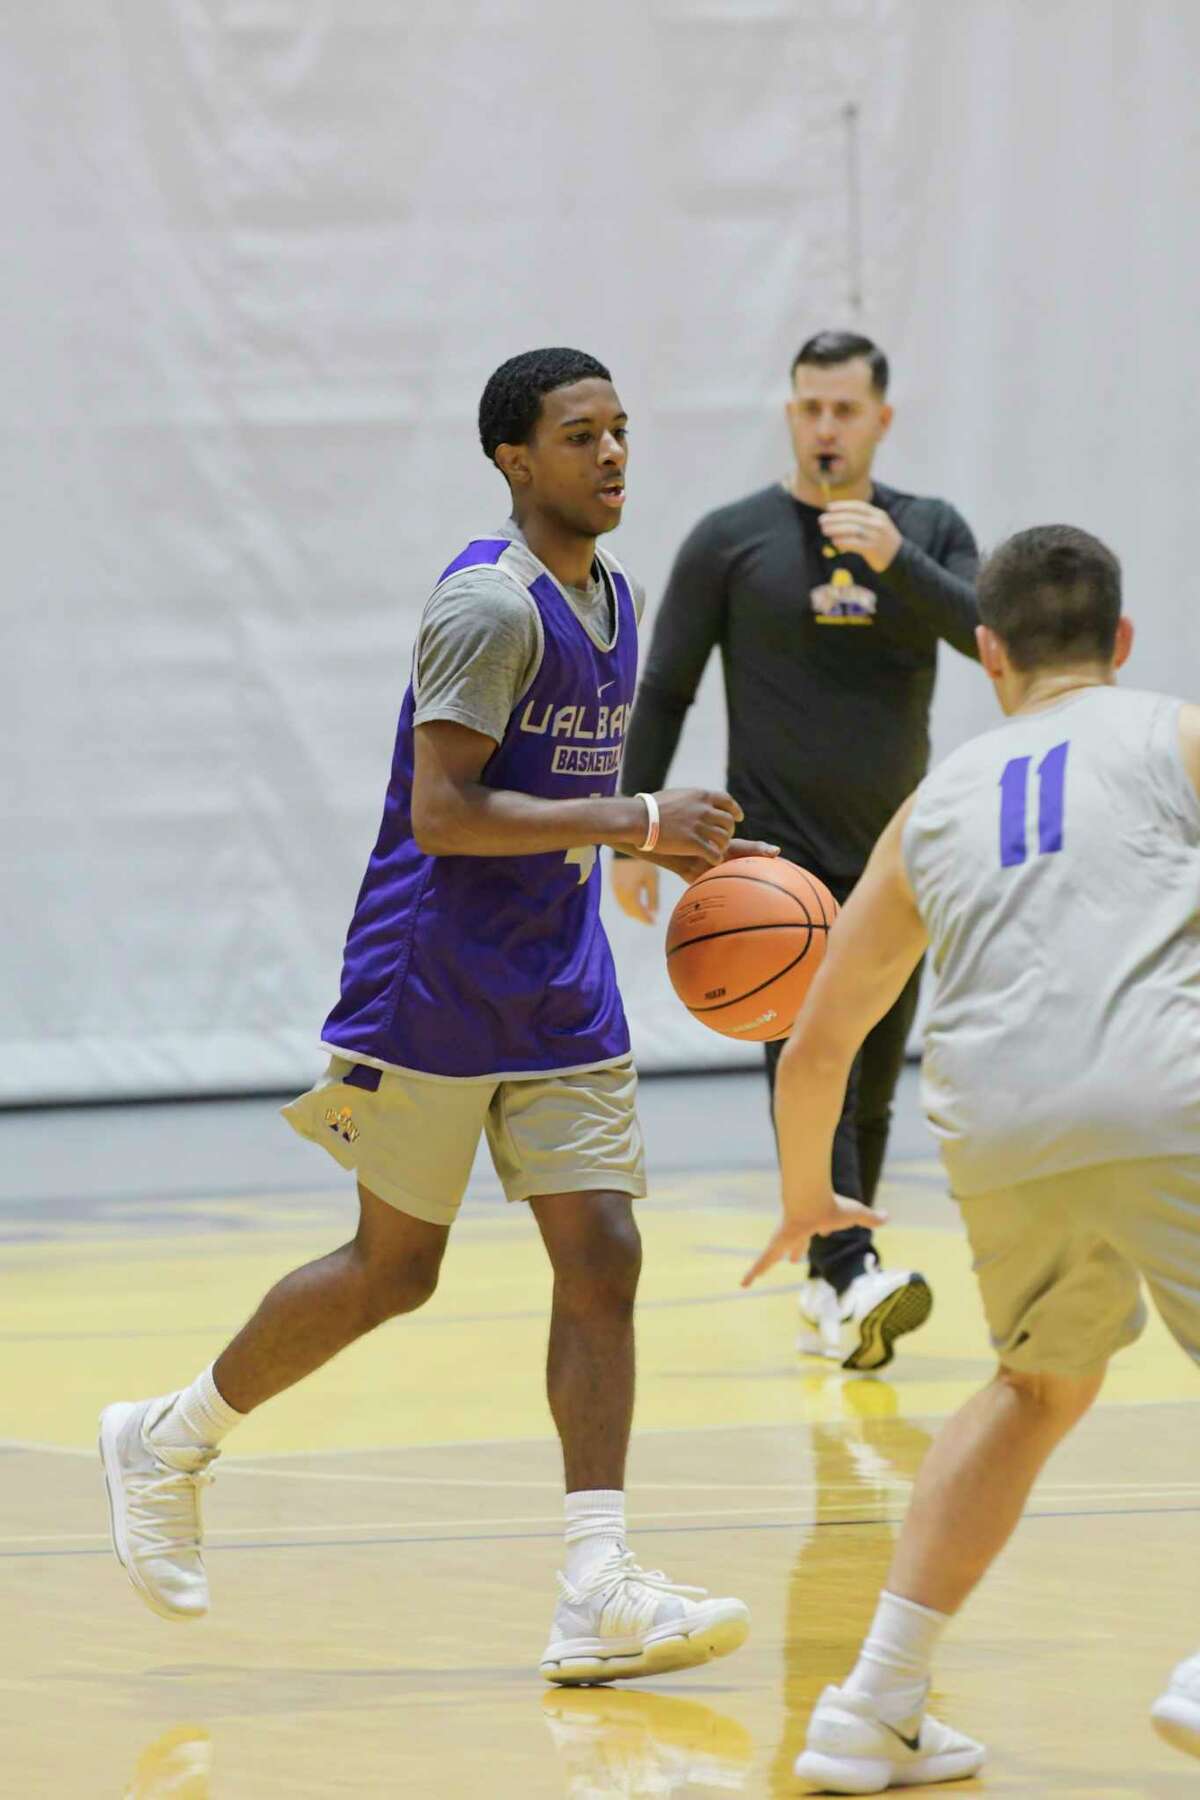 University at Albany men's basketball player, Reece Brooks, left, runs through drills with teammates during practice on Thursday, Oct. 11, 2018, in Albany, N.Y. (Paul Buckowski/Times Union)